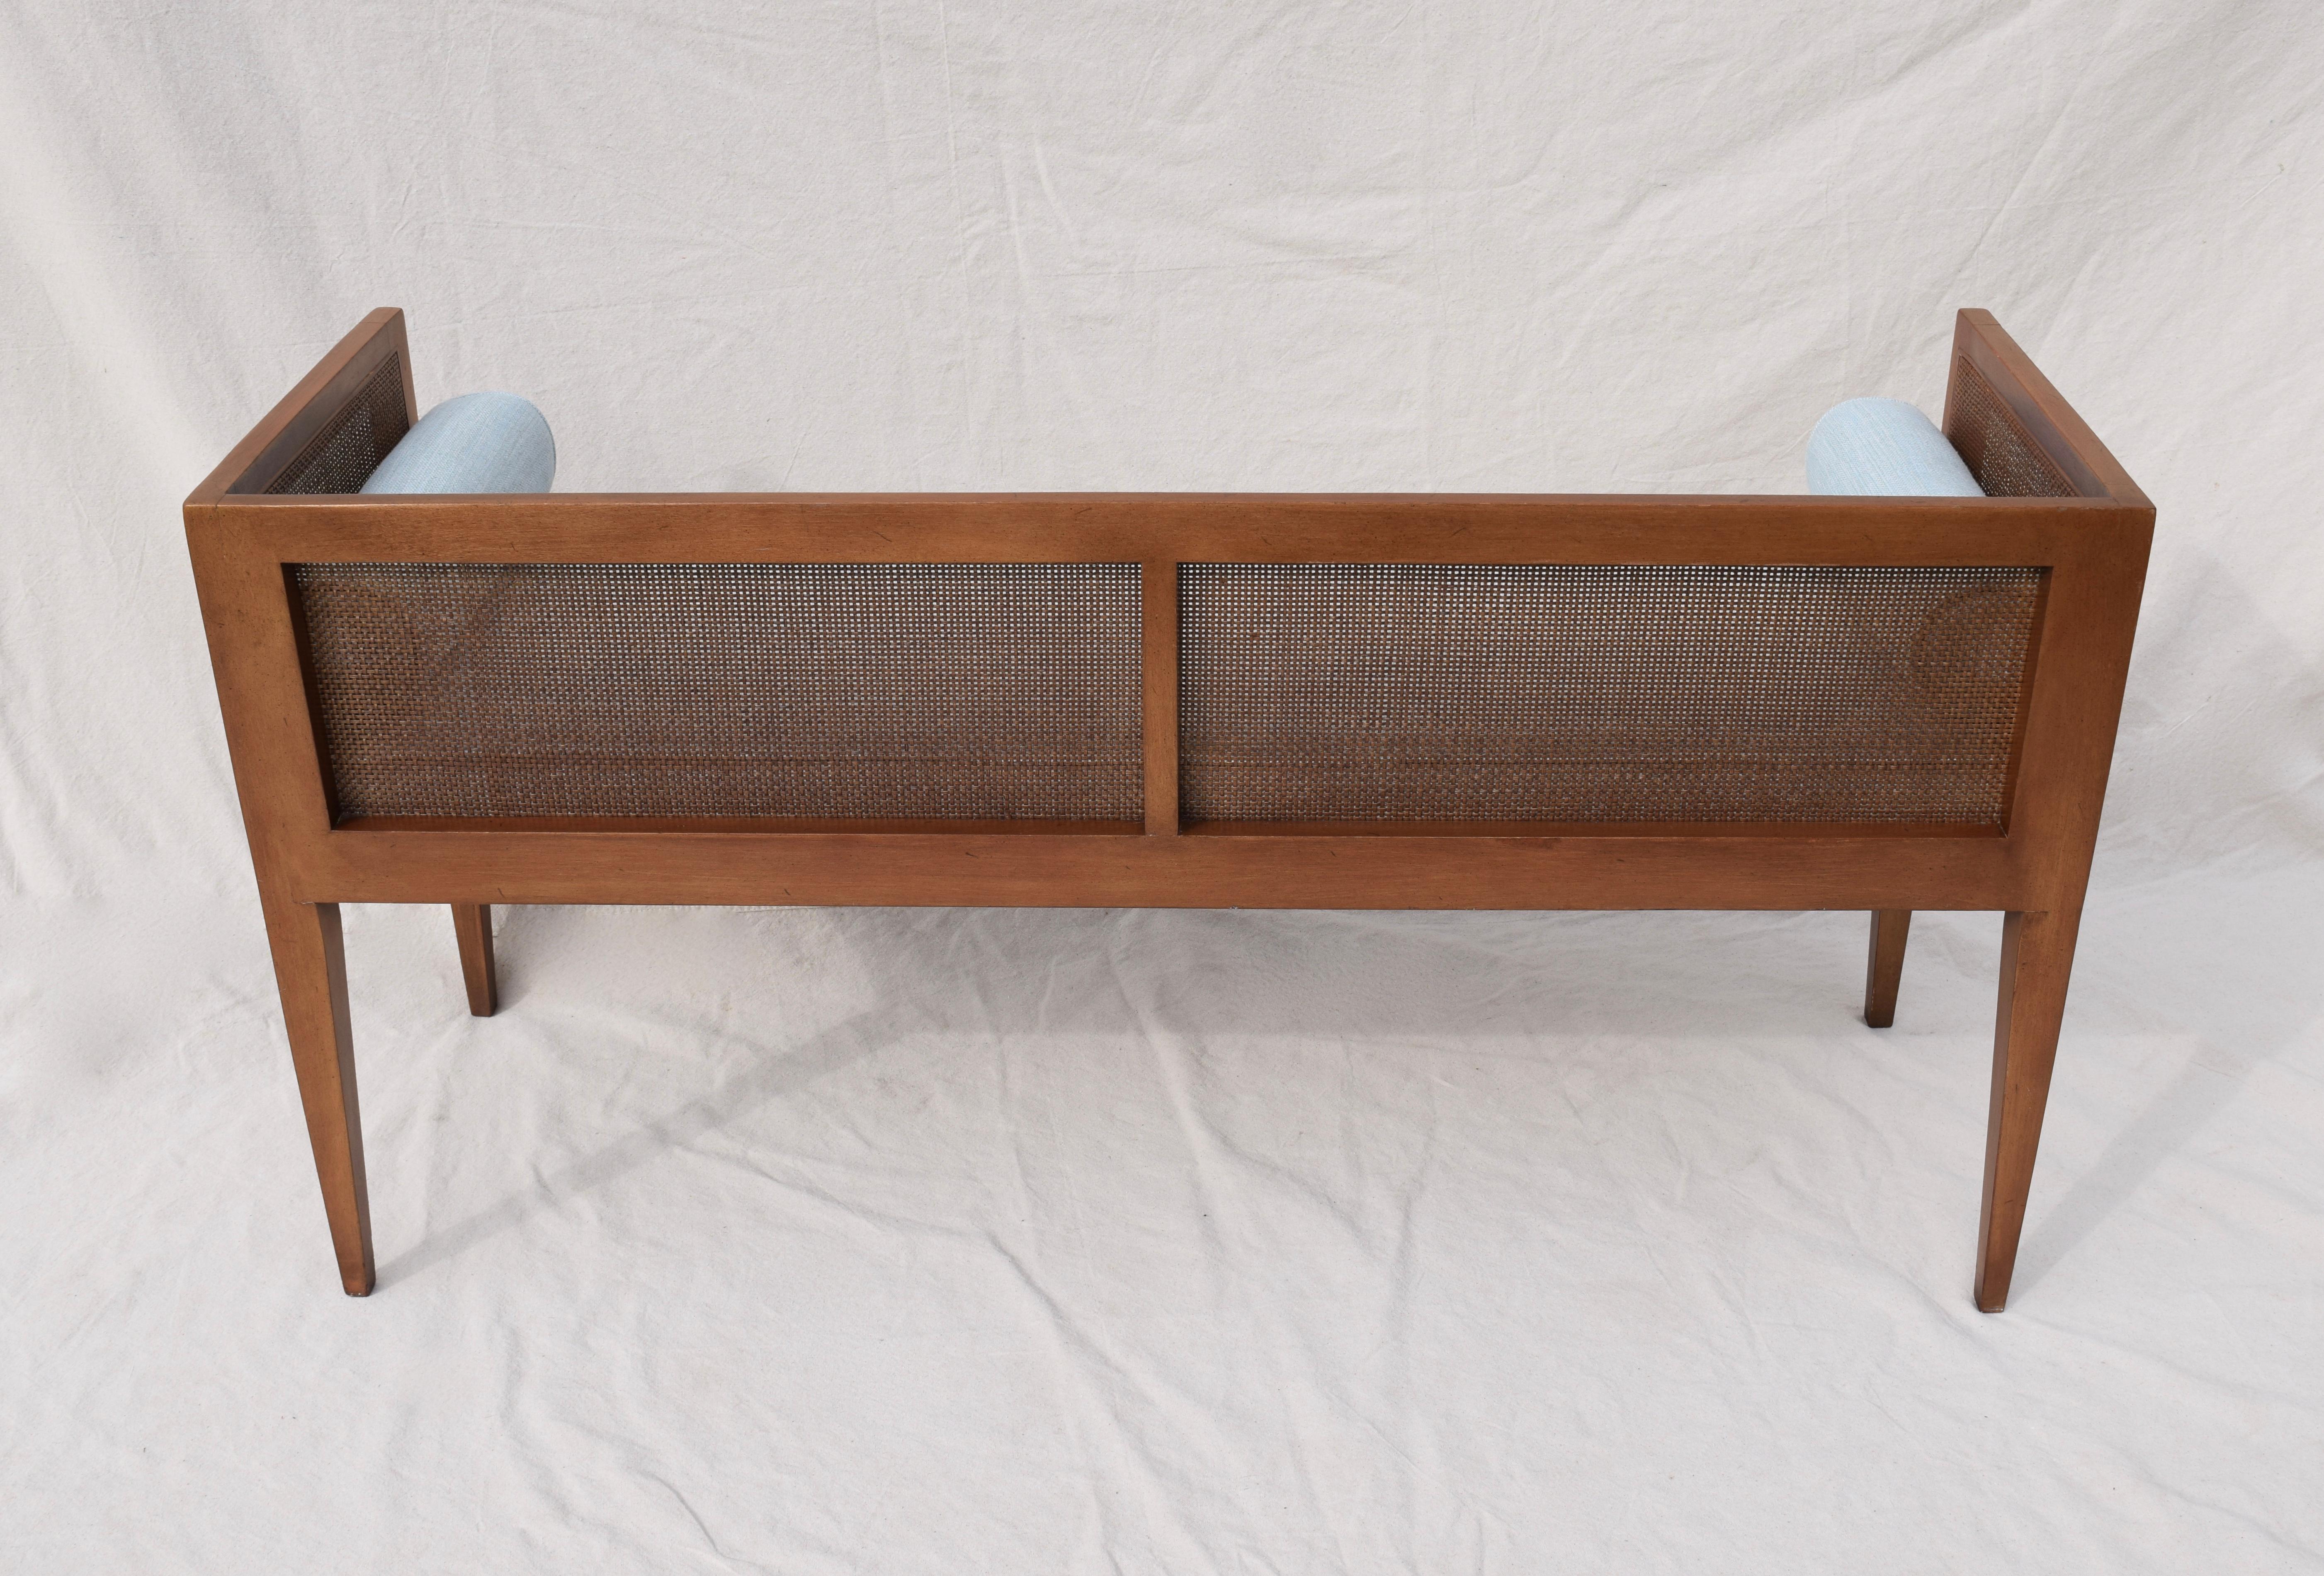 Linen 1950s Mahogany Window Bench Attributed to Edward Wormley for Dunbar